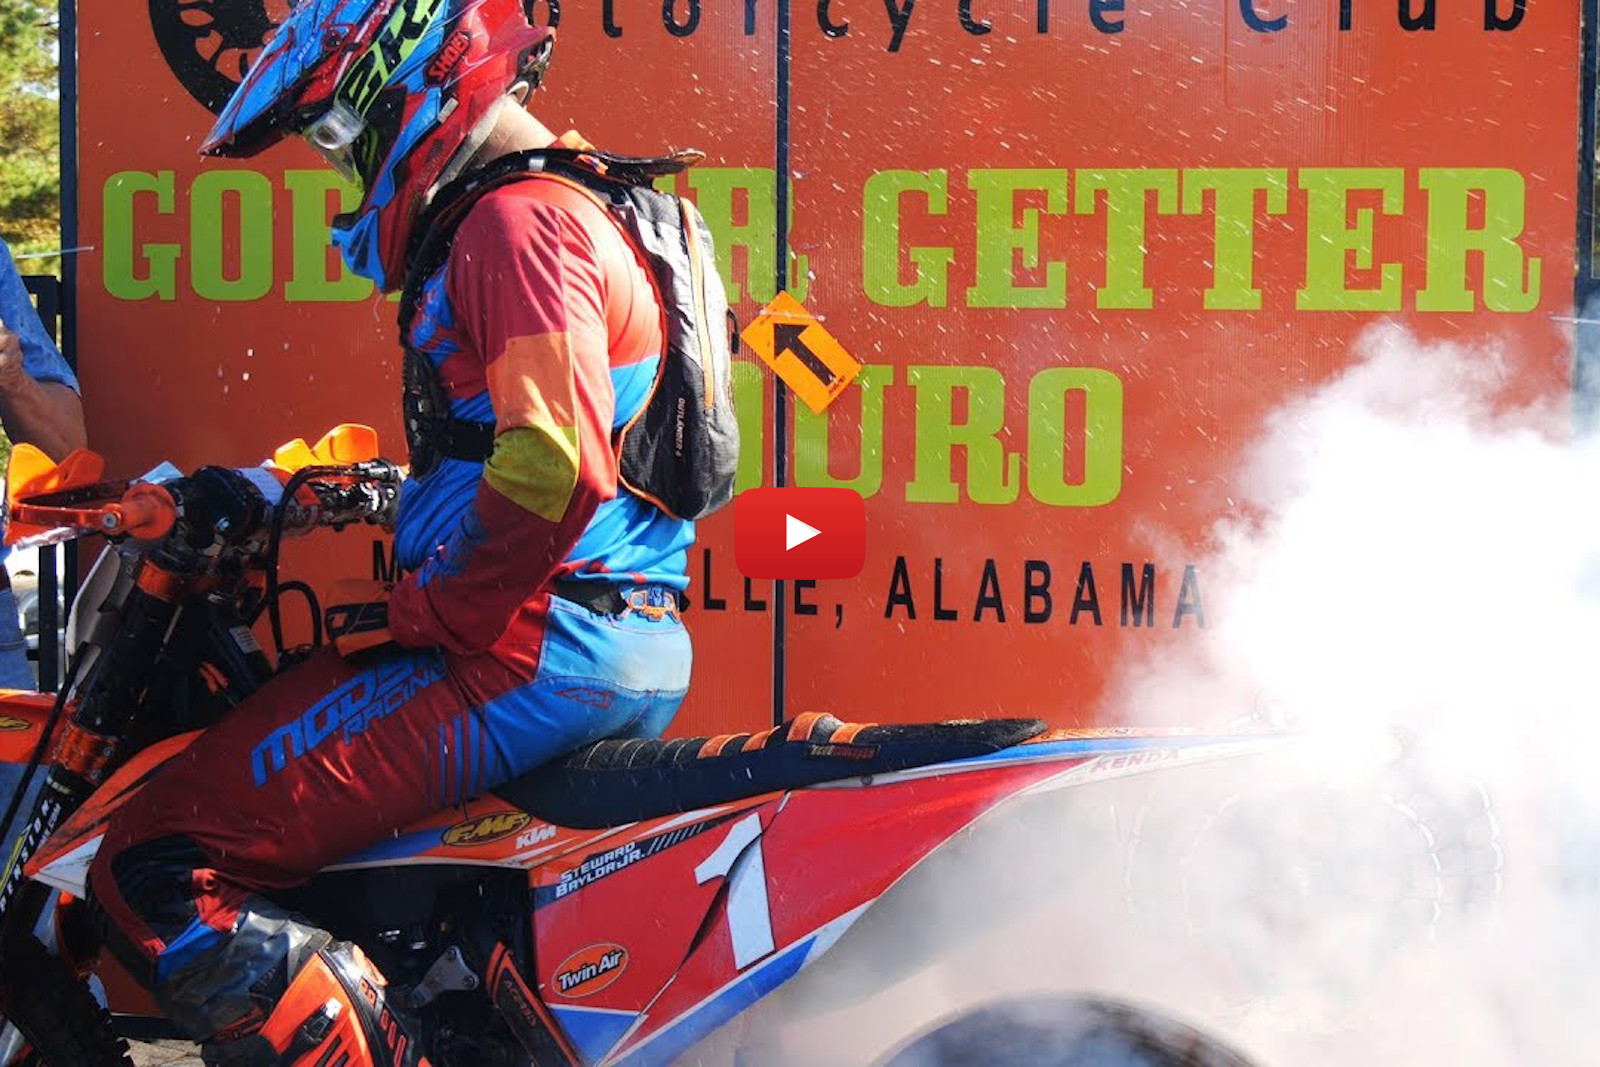 Gobbler Getter National Enduro – Flat-out between trees  